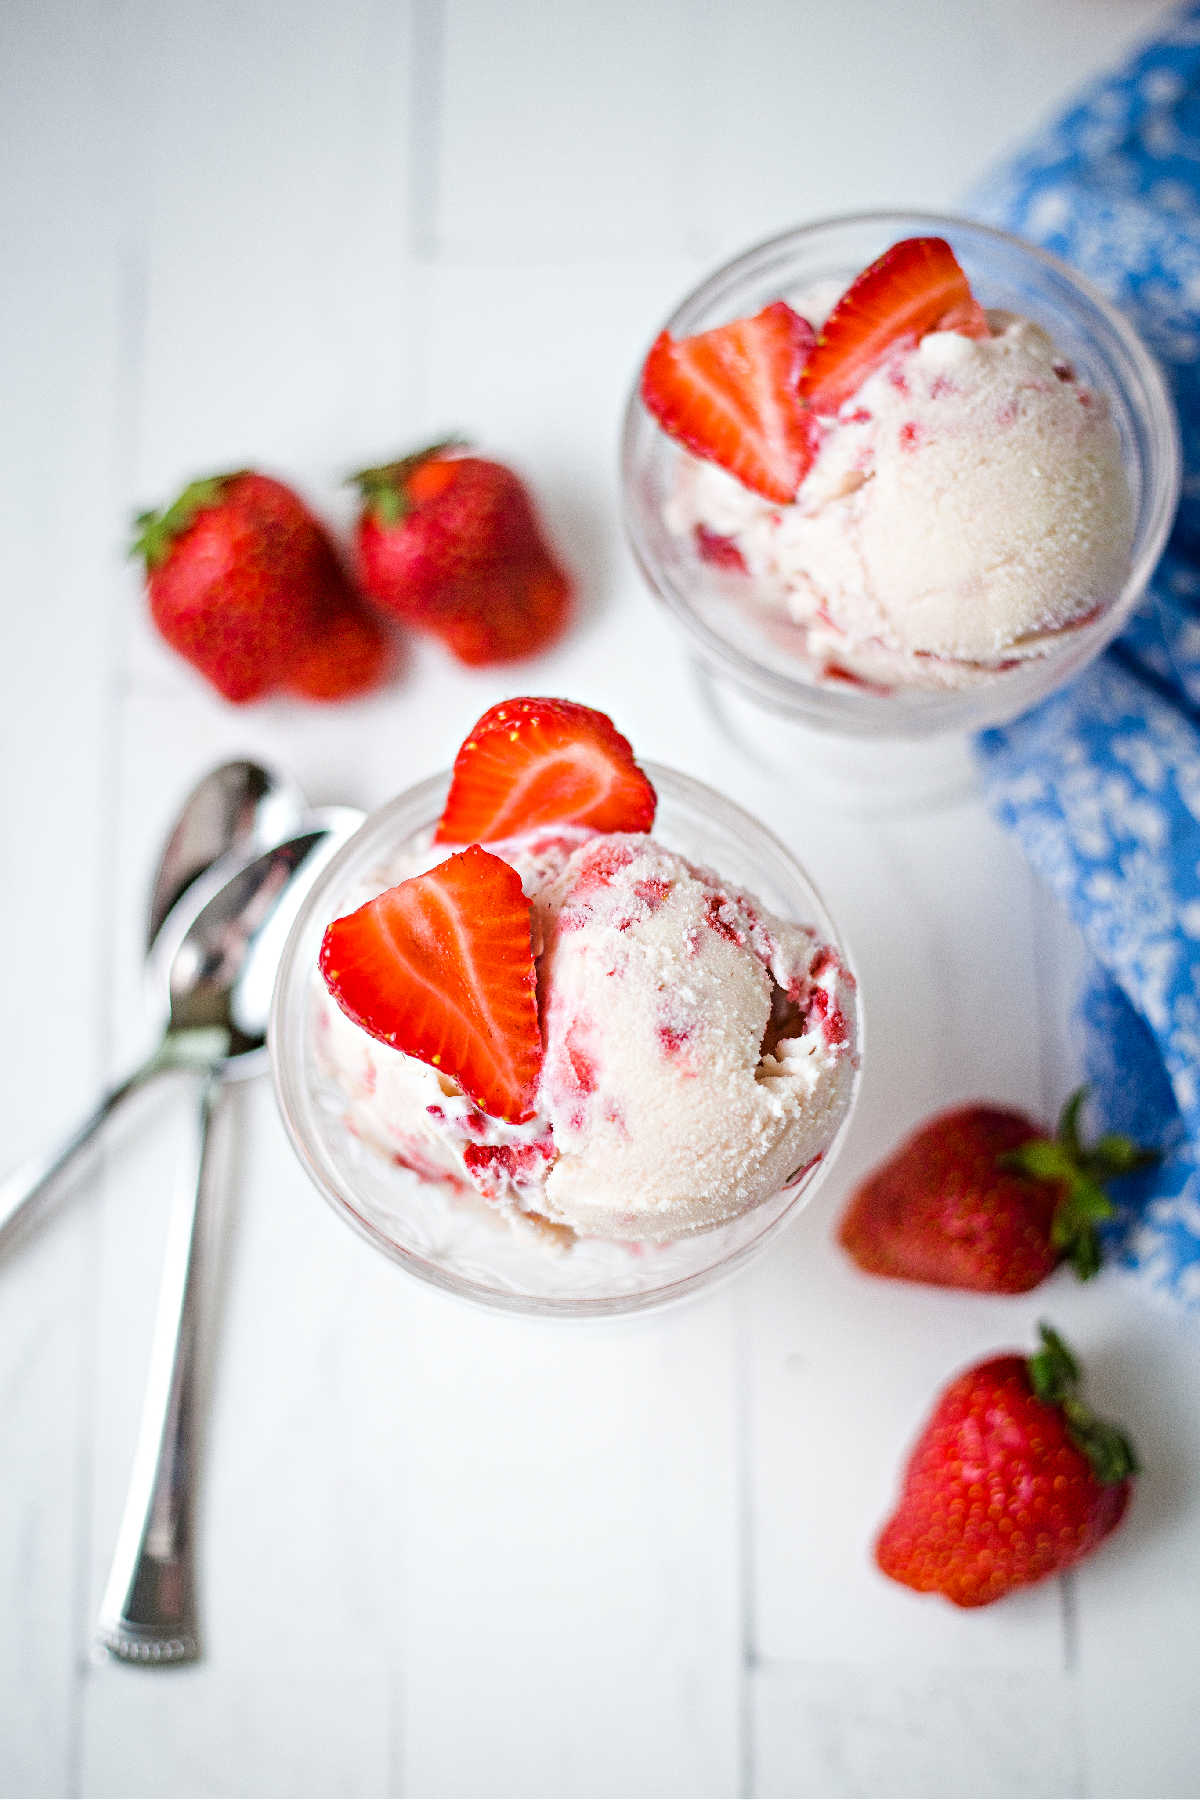 two ice cream bowls with scoops of homemade strawberry ice cream on a table with two spoons.